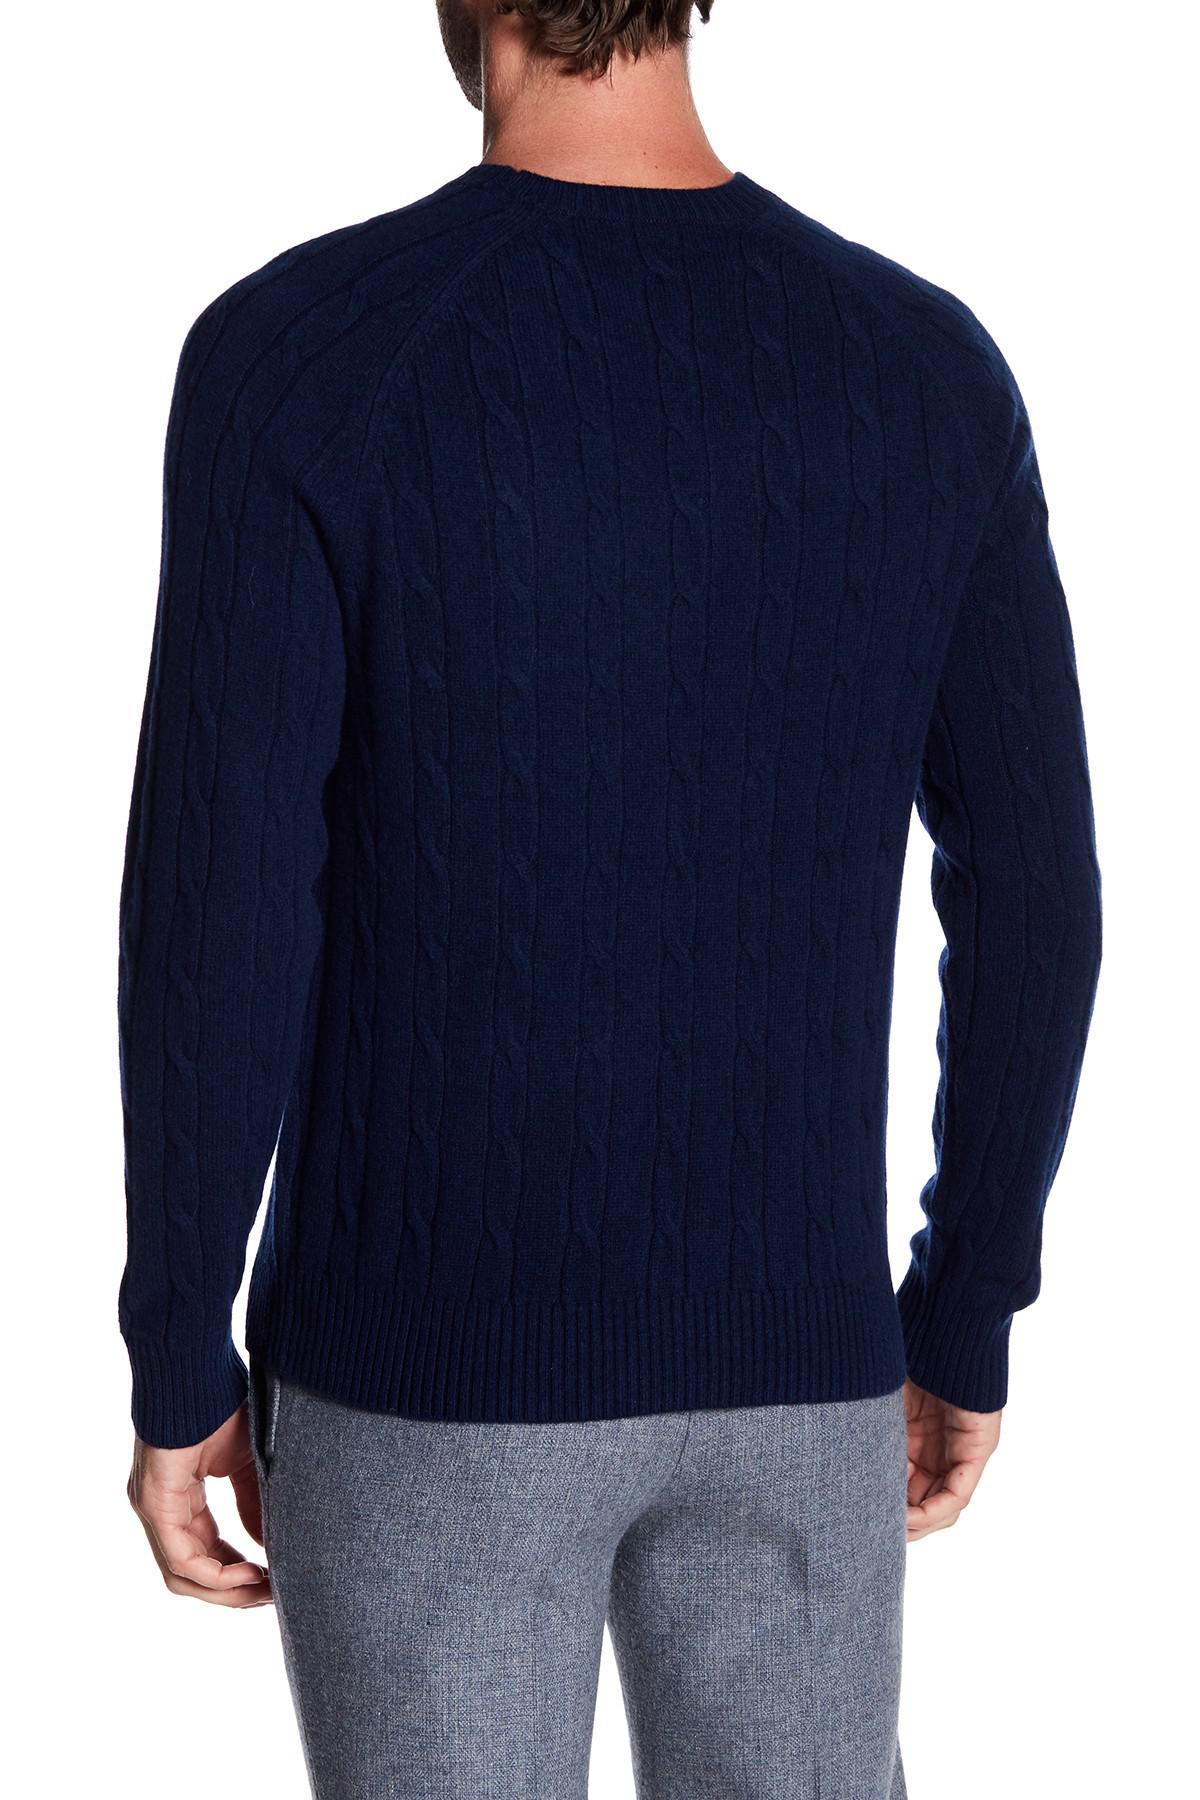 Brooks brothers Merino Wool Cable Knit Sweater in Blue for Men ...